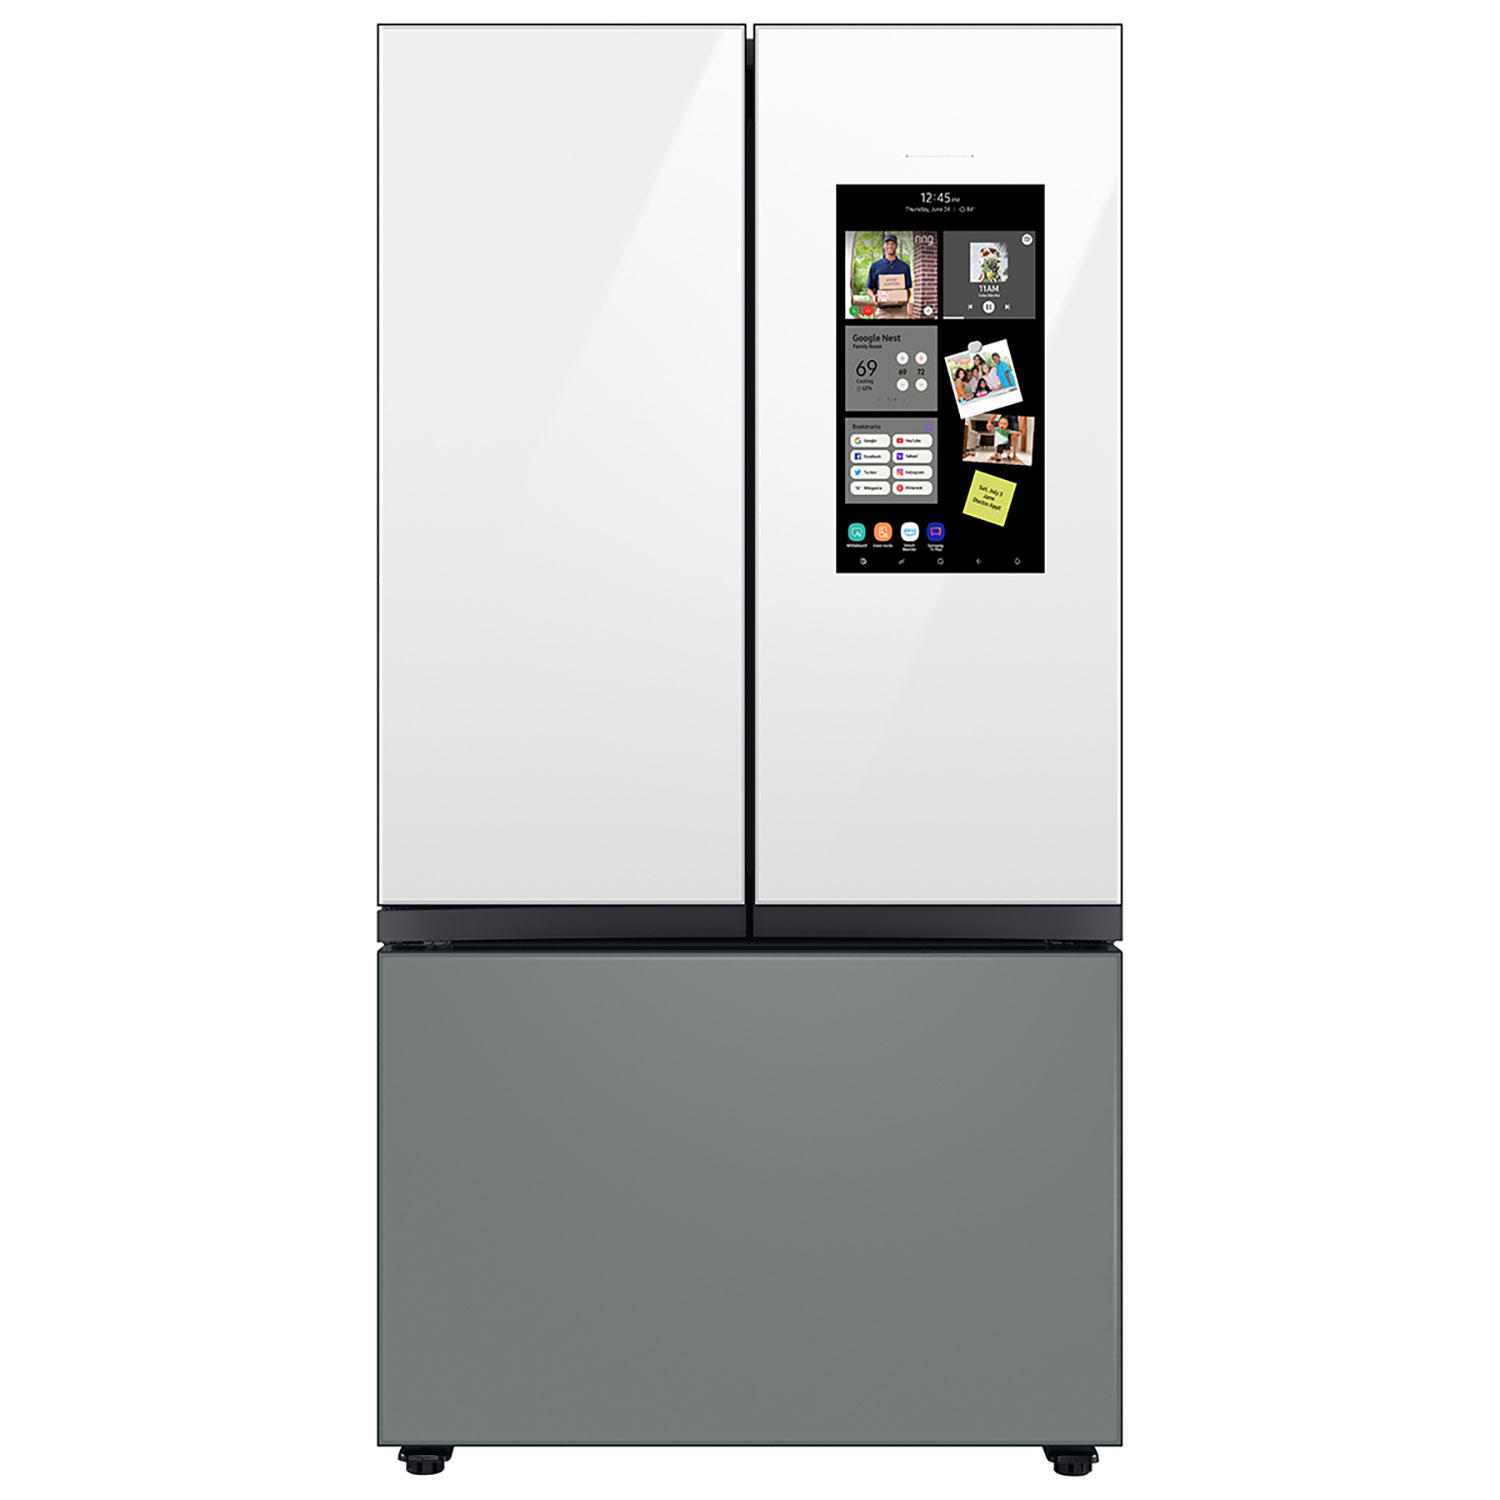 Samsung 24 cu. ft. Smart BESPOKE 3-Door French-Door Refrigerator with Customizable Panel Colors and Family Hub in White